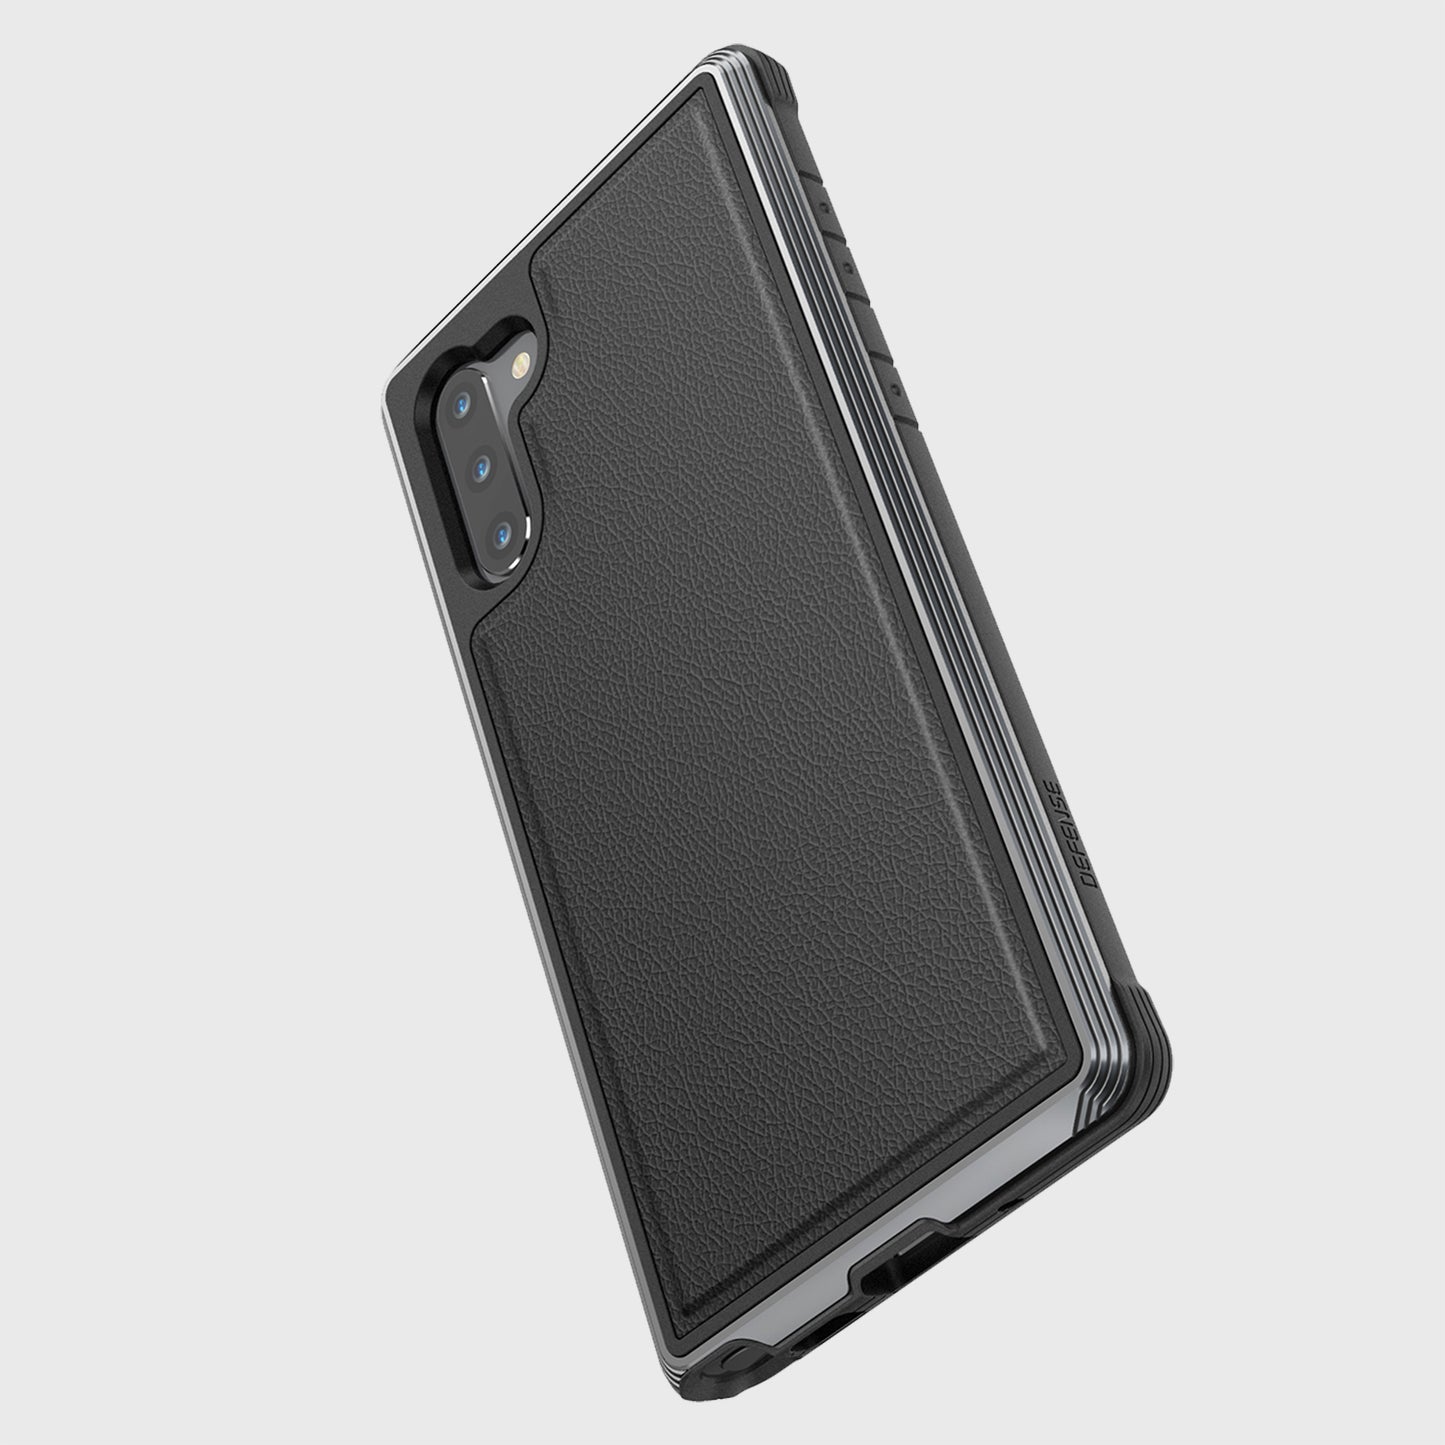 Samsung Galaxy Note 10+ Case - Lux Black Leather